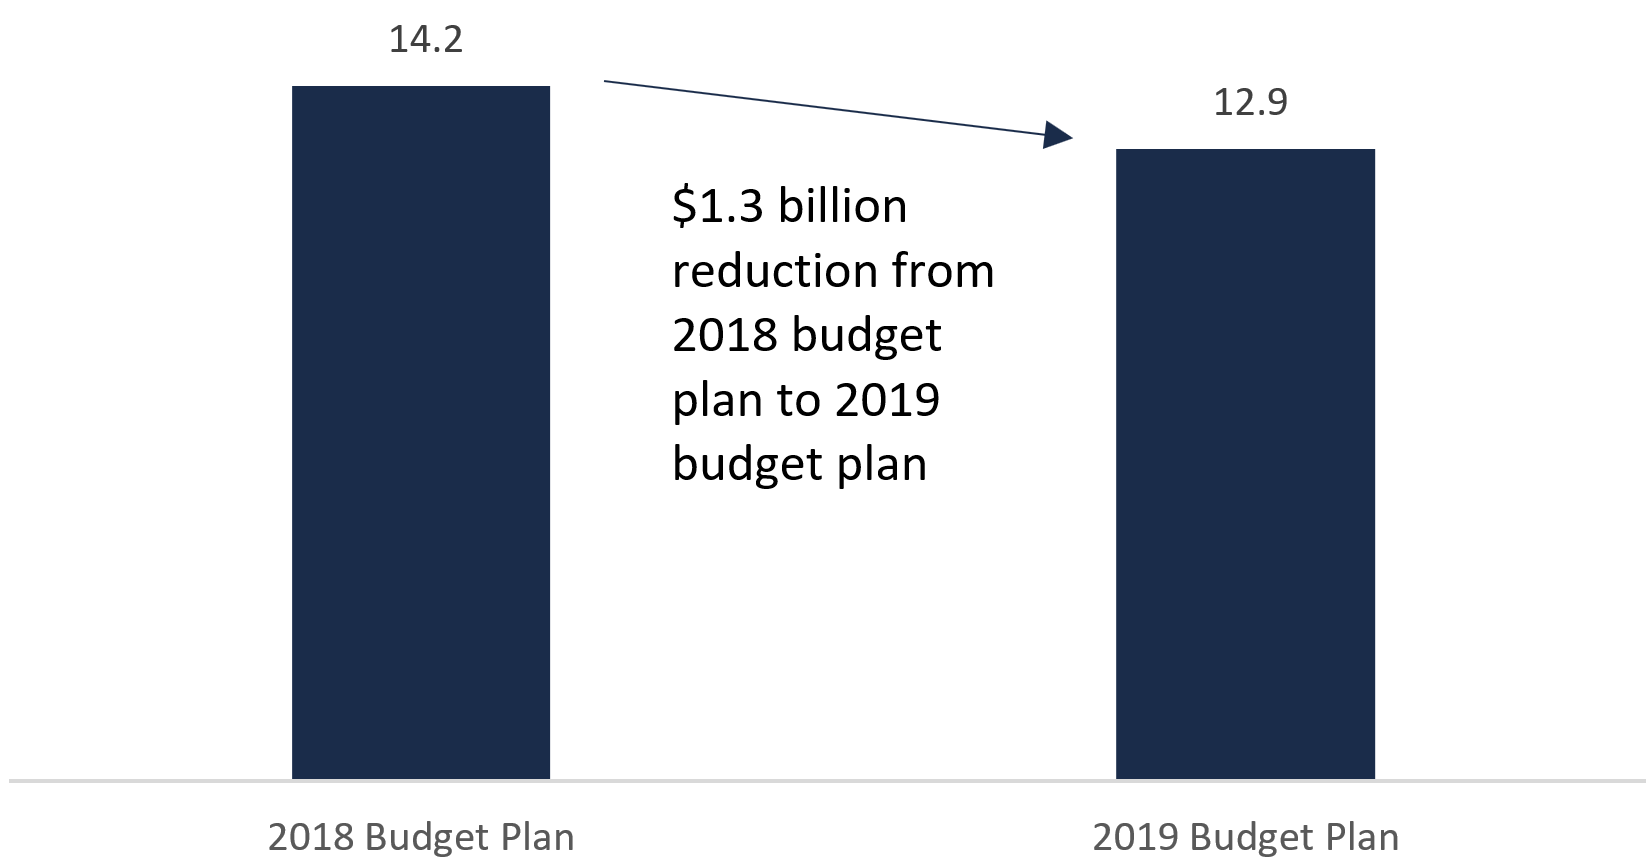 This figure shows the projected highways capital spending from 2019-20 to 2023-24 as stated in the 2018 budget plan and the 2019 budget plan in billions of dollars. The figure shows that the 2018 budget plan highways capital spending projection was $14.2 billion and the highways capital spending projection from the 2019 budget plan is $12.9 billion. This chart highlights that there is a $1.3 billion reduction from the 2018 budget plan to the 2019 budget plan.